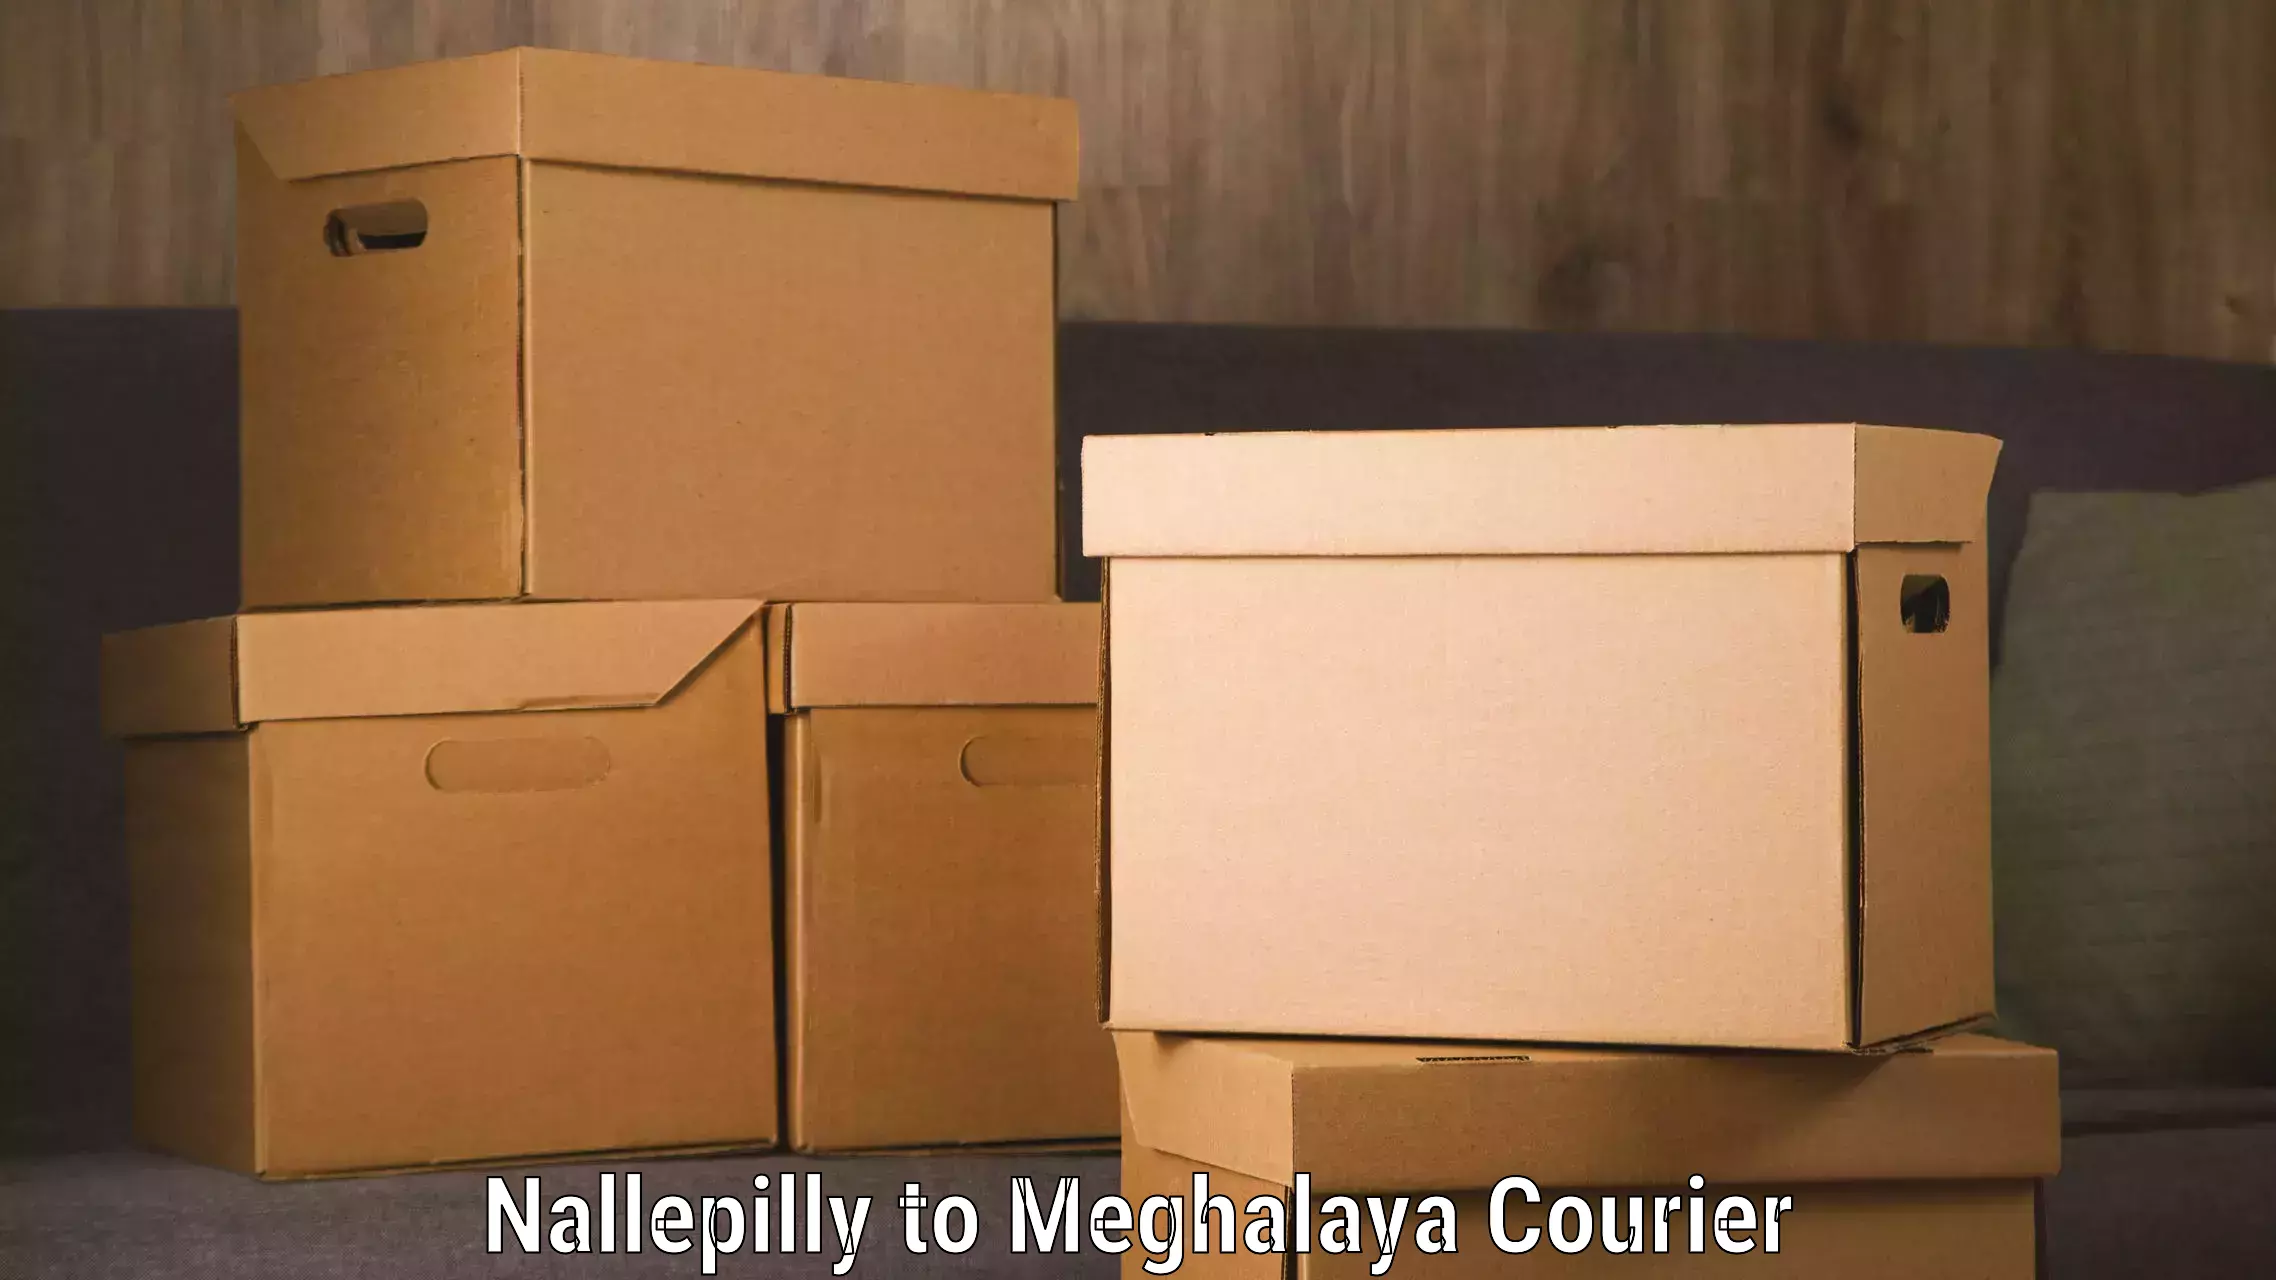 Emergency parcel delivery in Nallepilly to Meghalaya